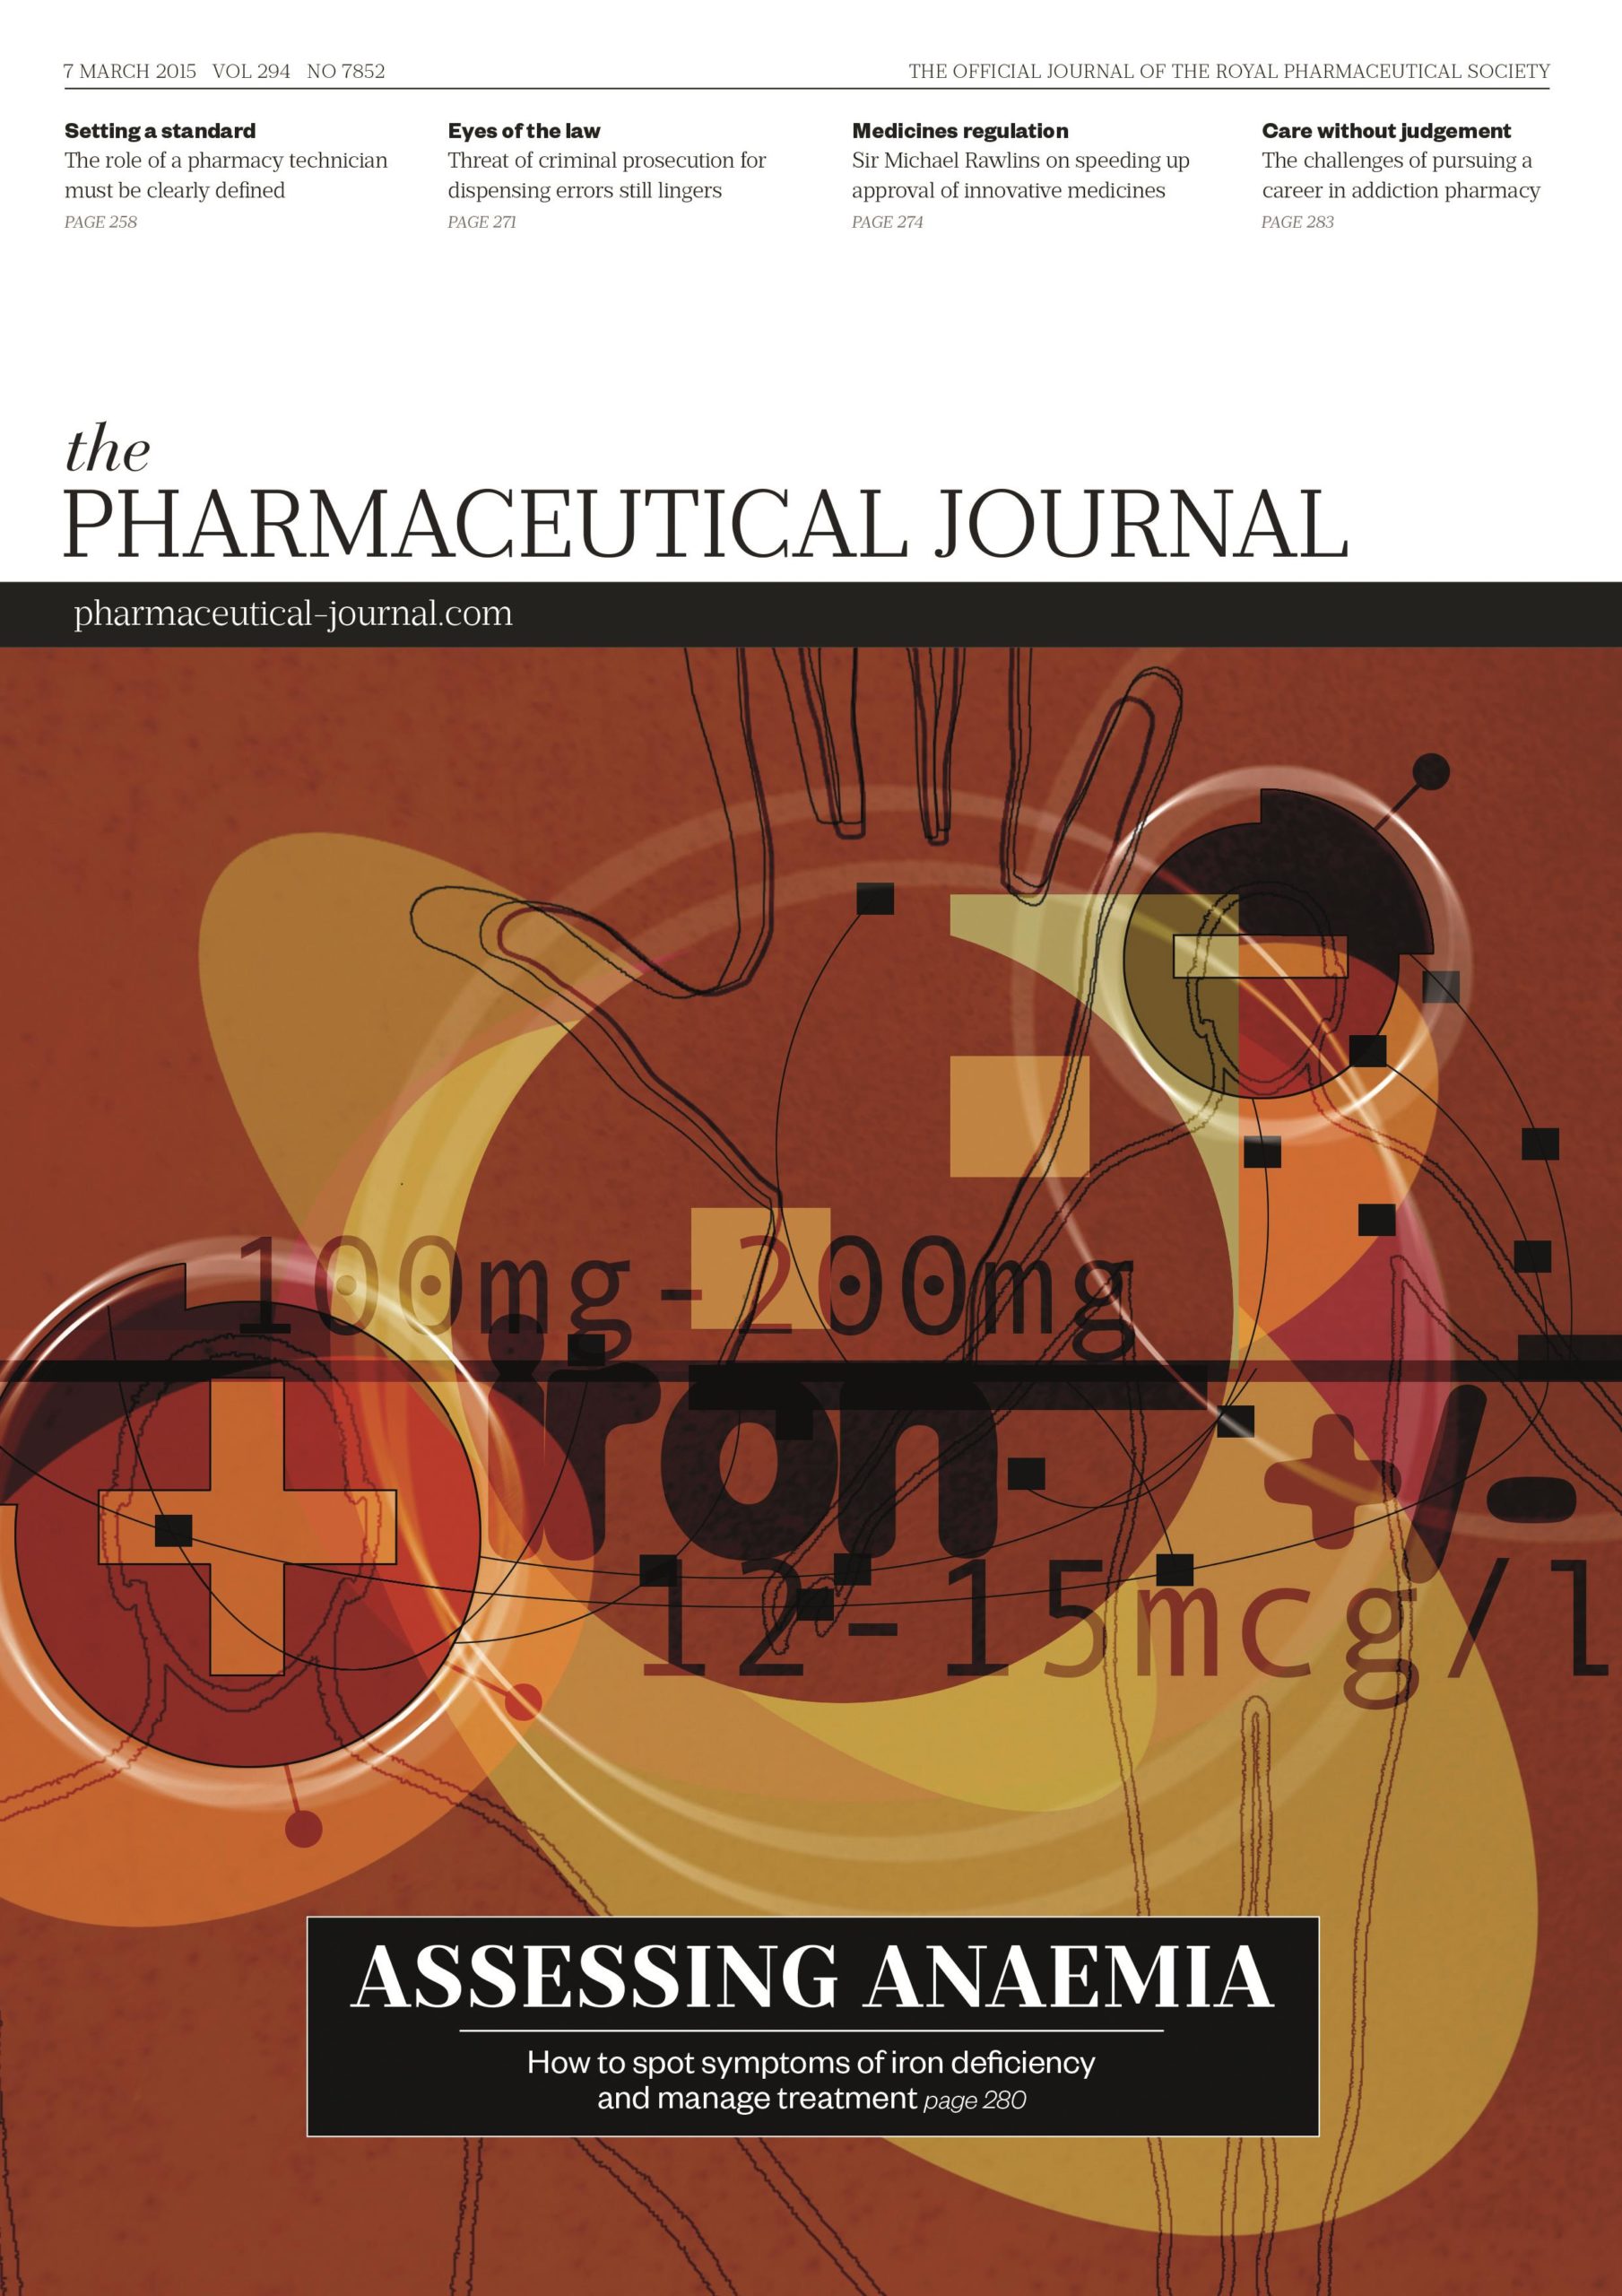 Publication issue cover for PJ, 7 March 2015, Vol 294, No 7852